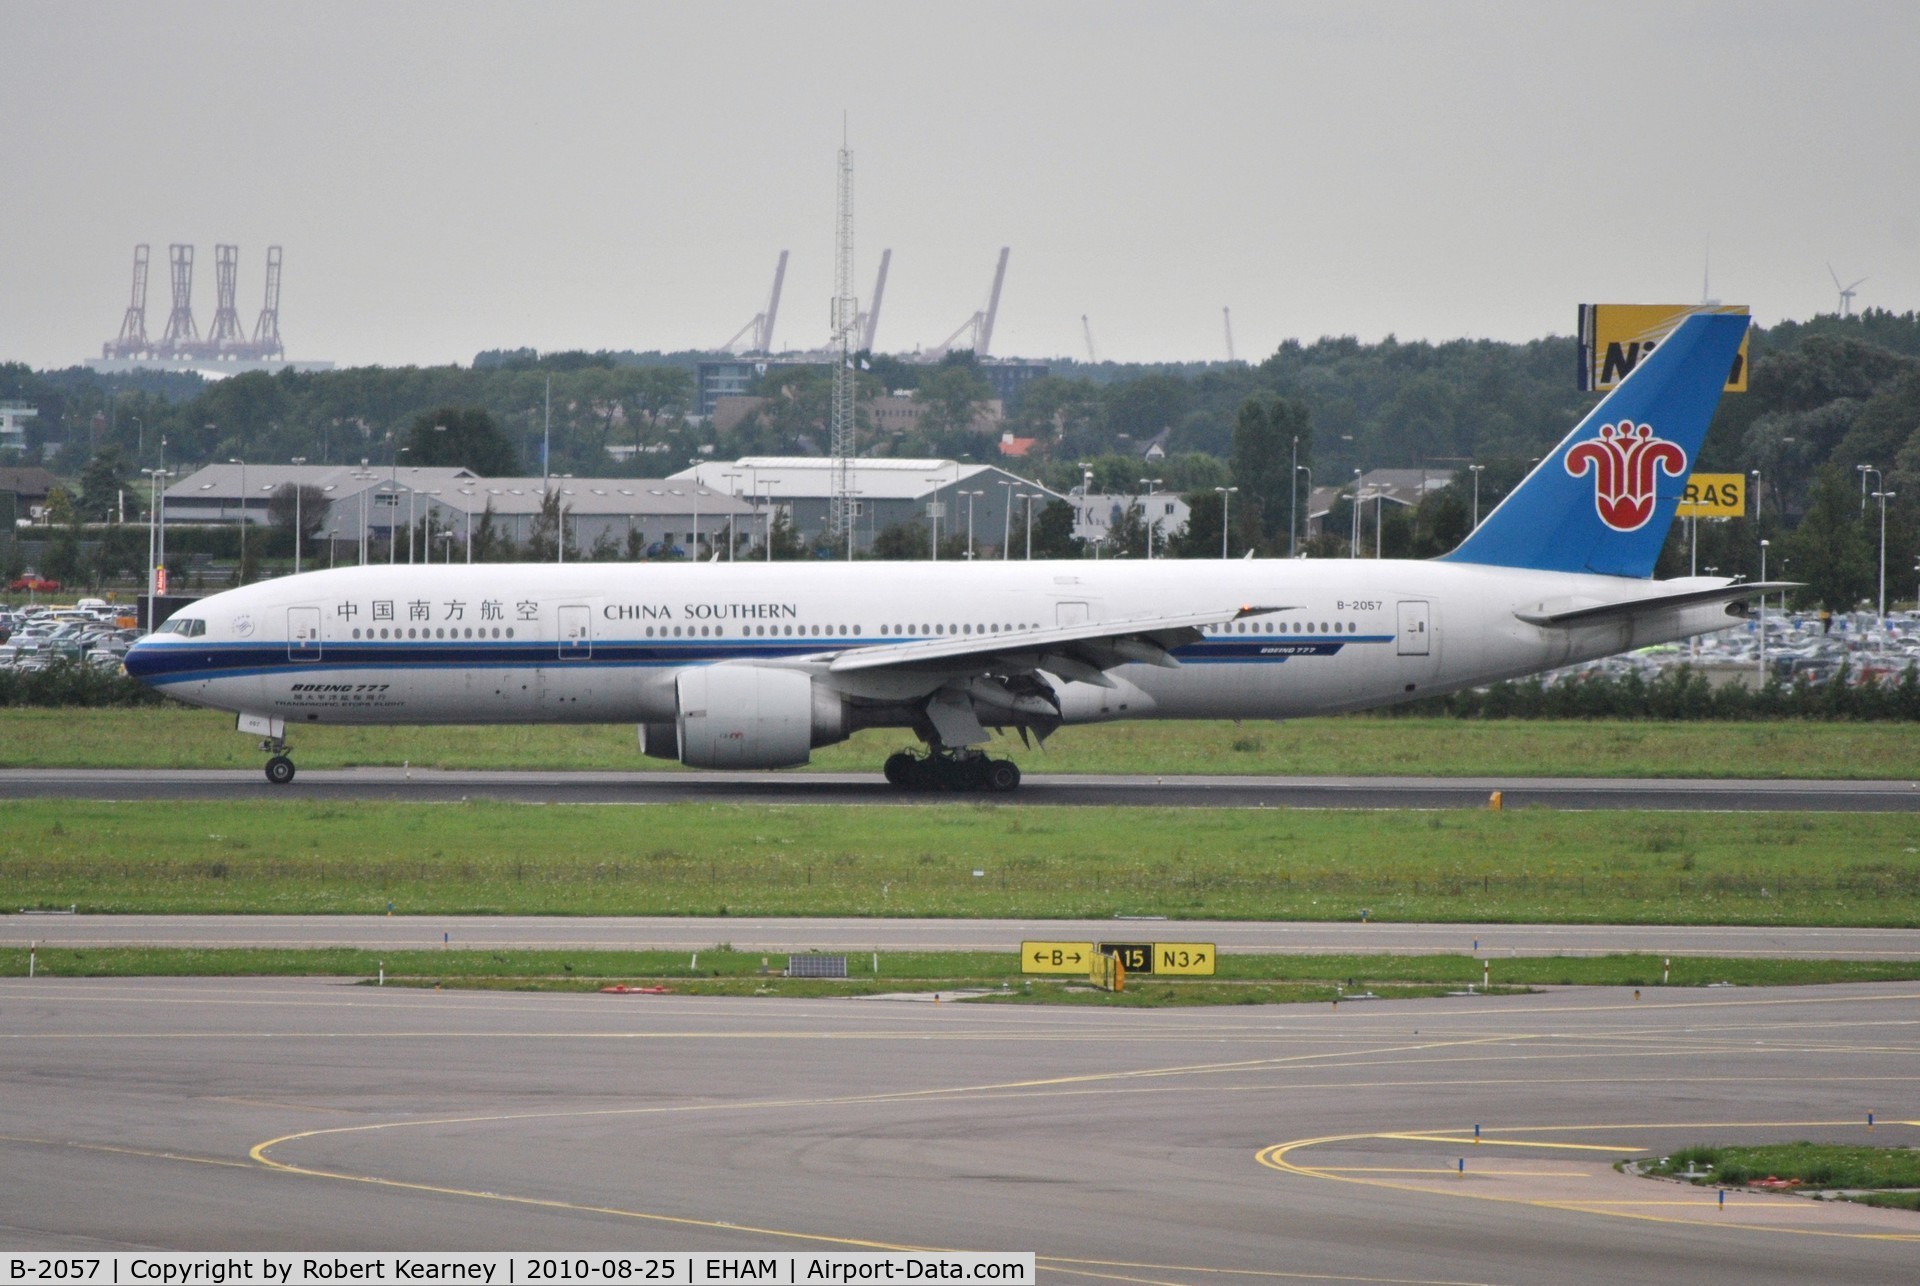 B-2057, 1998 Boeing 777-21B/ER C/N 27604, China Southern coming to a stop on r/w 27